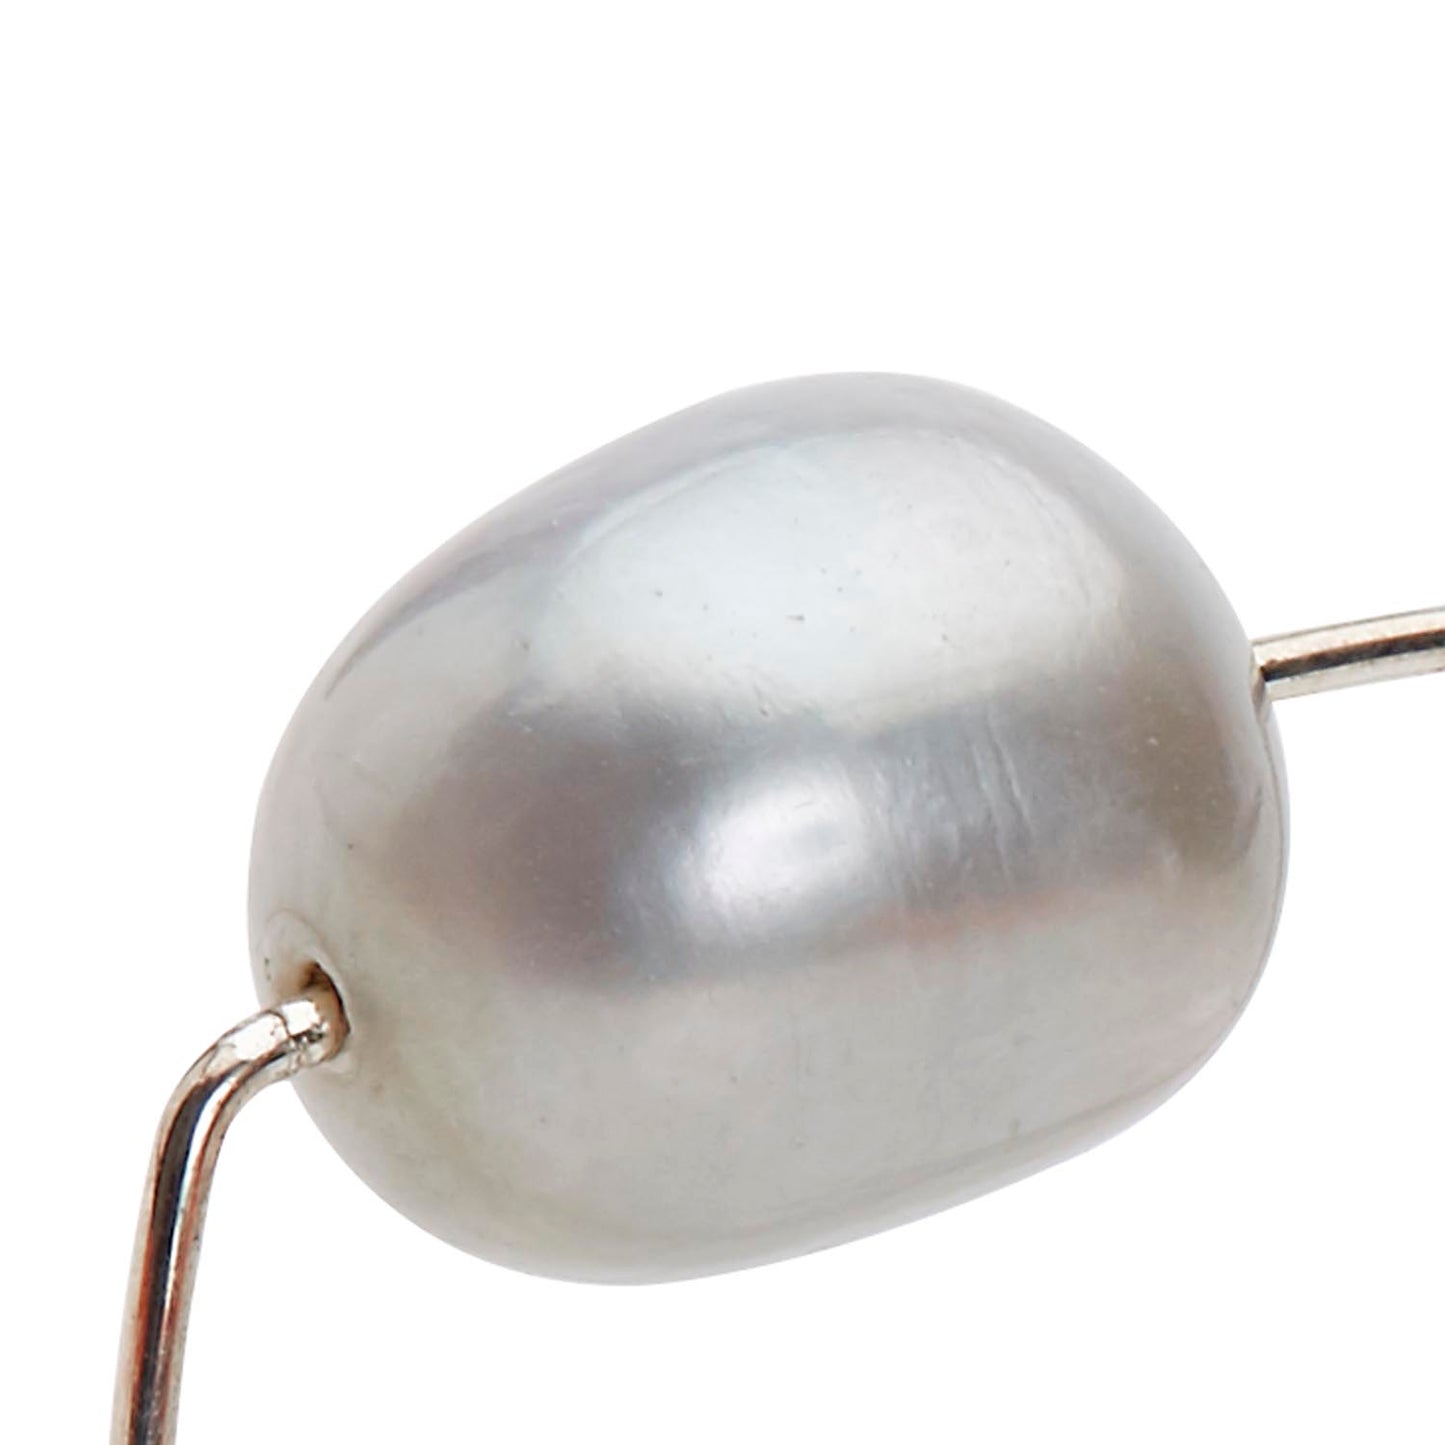 Asymmetric Square Ring with Grey Pearl